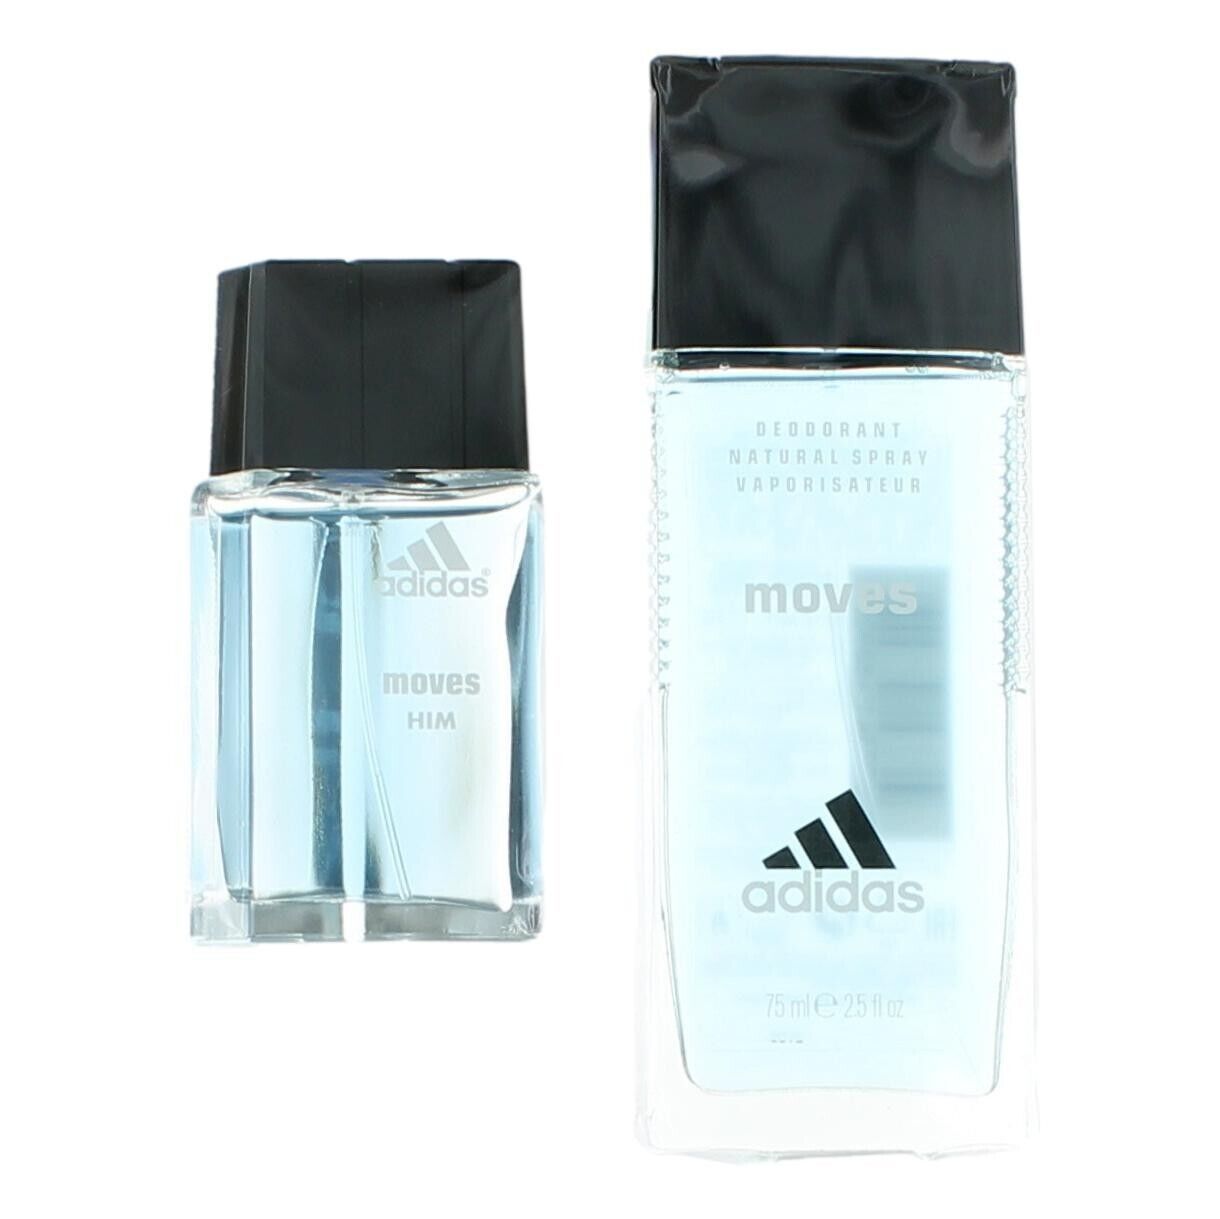 Adidas Moves by Adidas, 2 Piece Gift Set for Men - $30.92